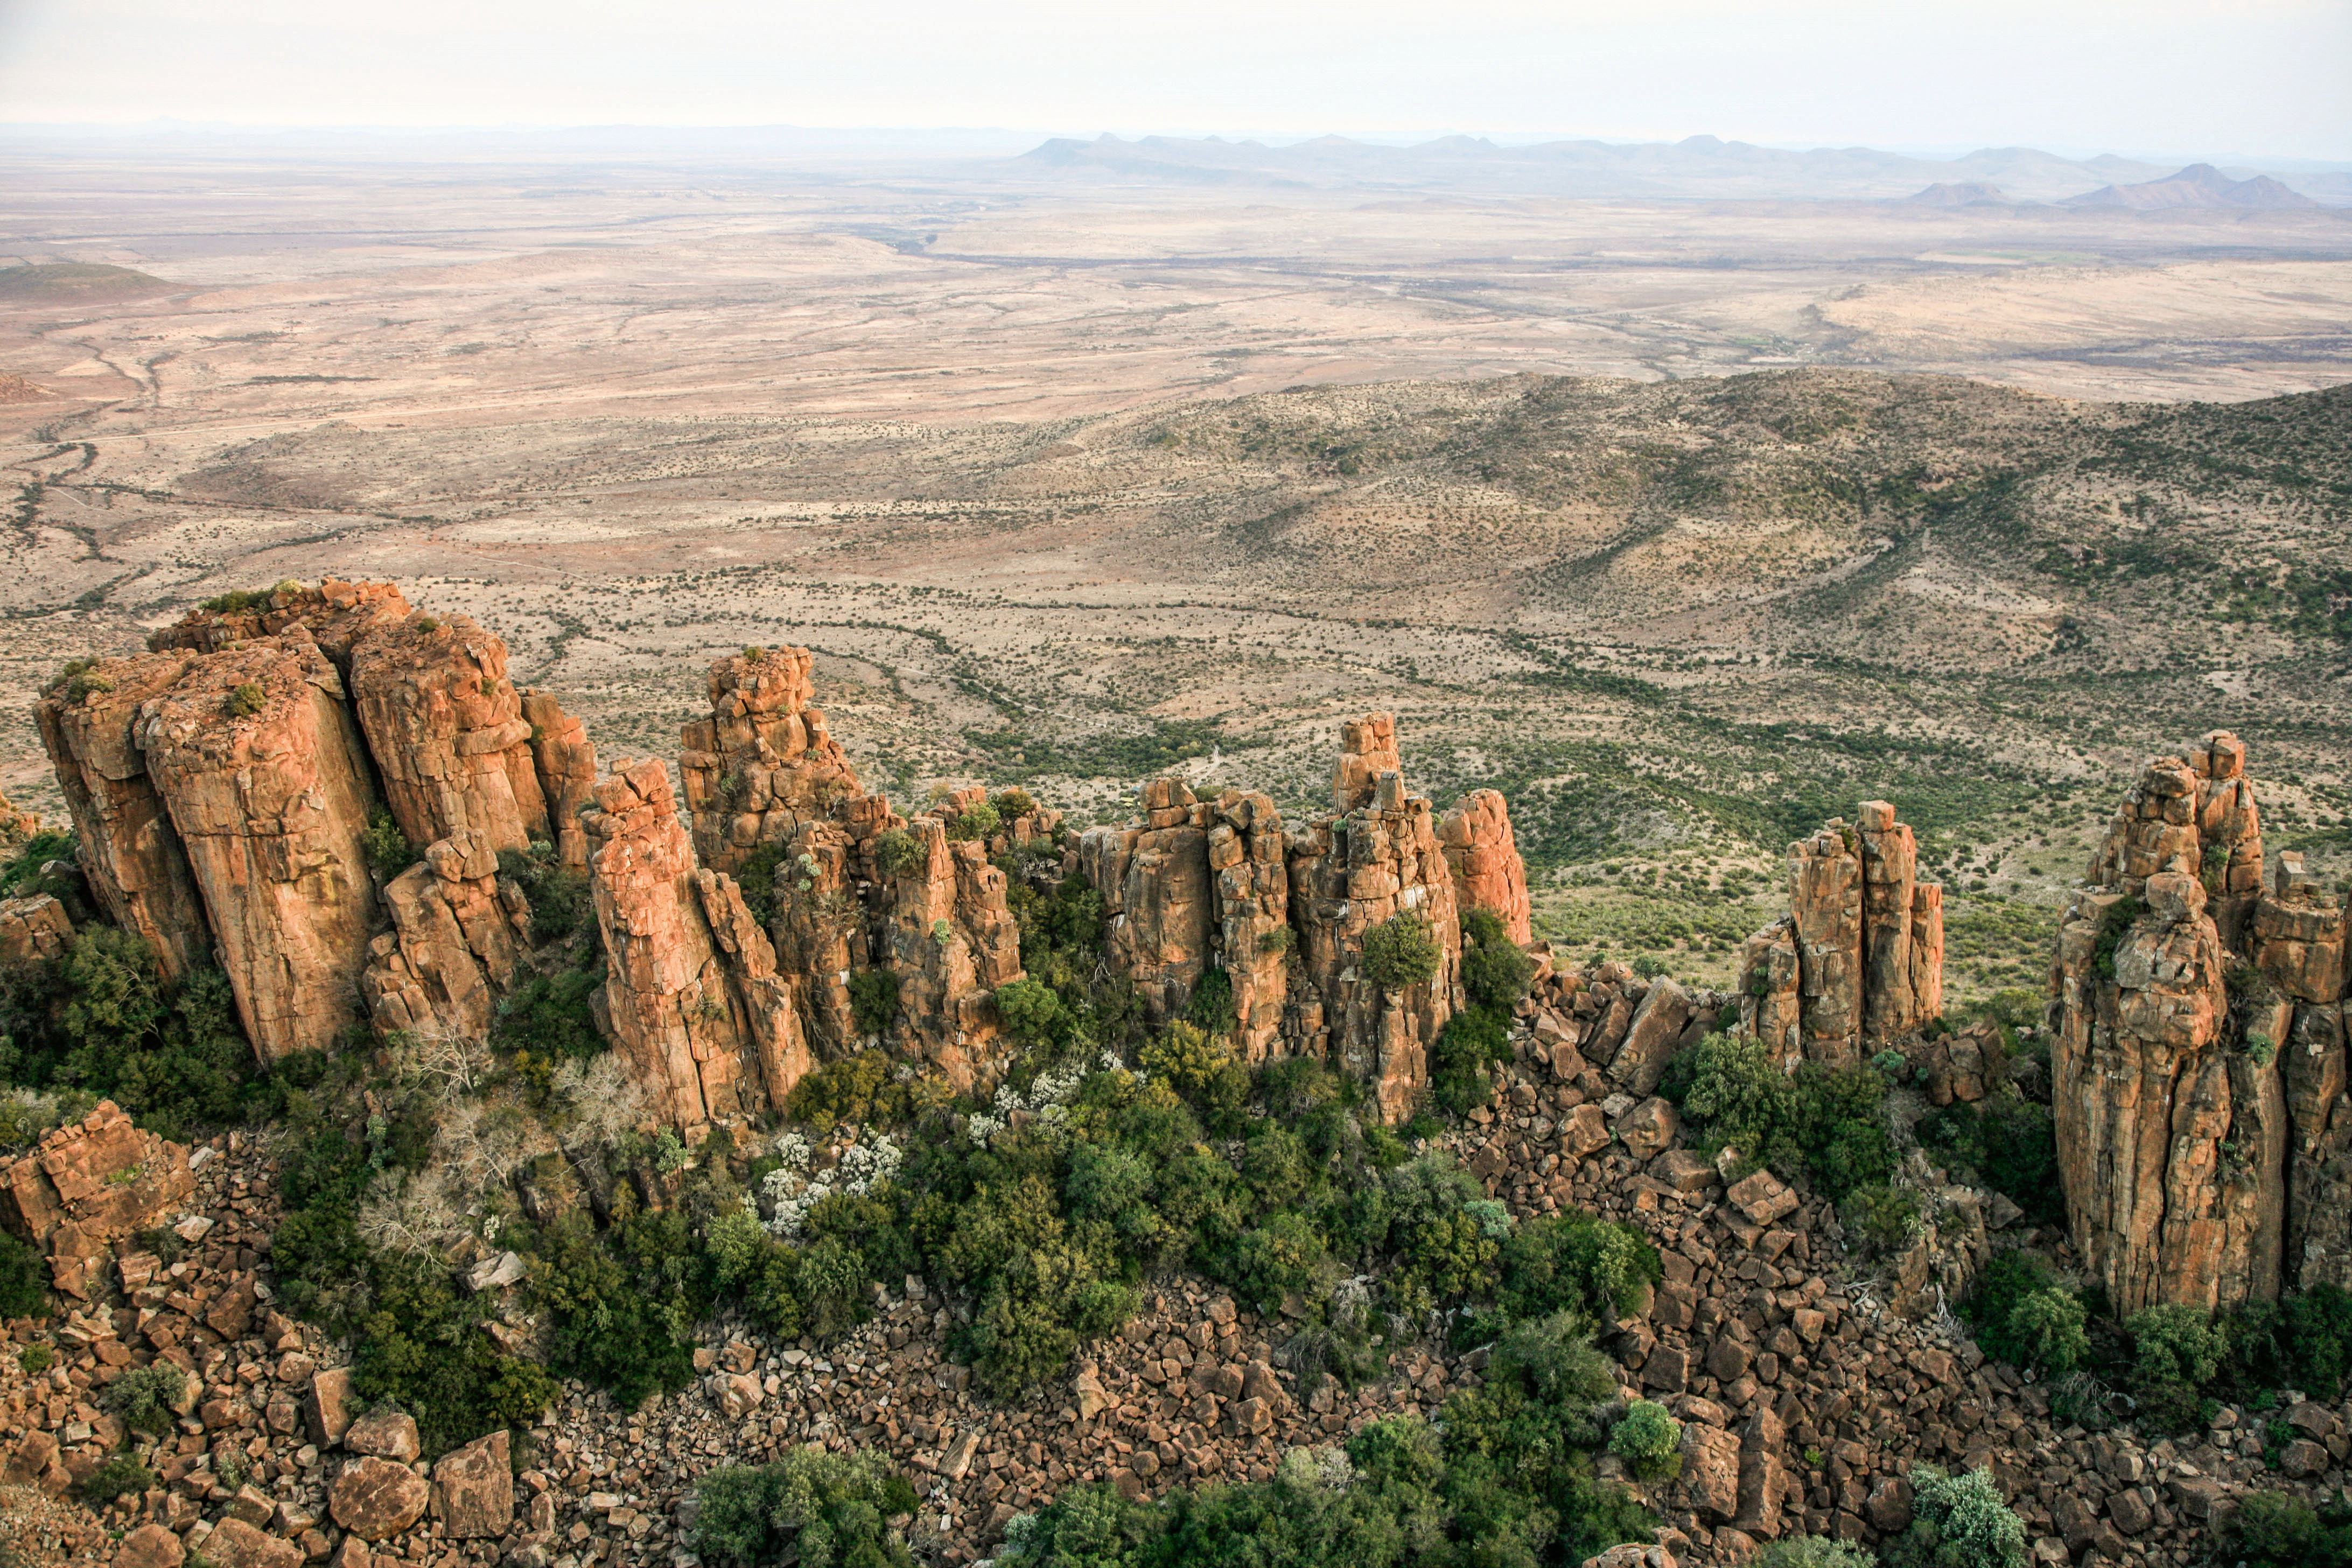 The view of the Karoo Heartland from above the Valley of Desolation. Image: Chris Marais